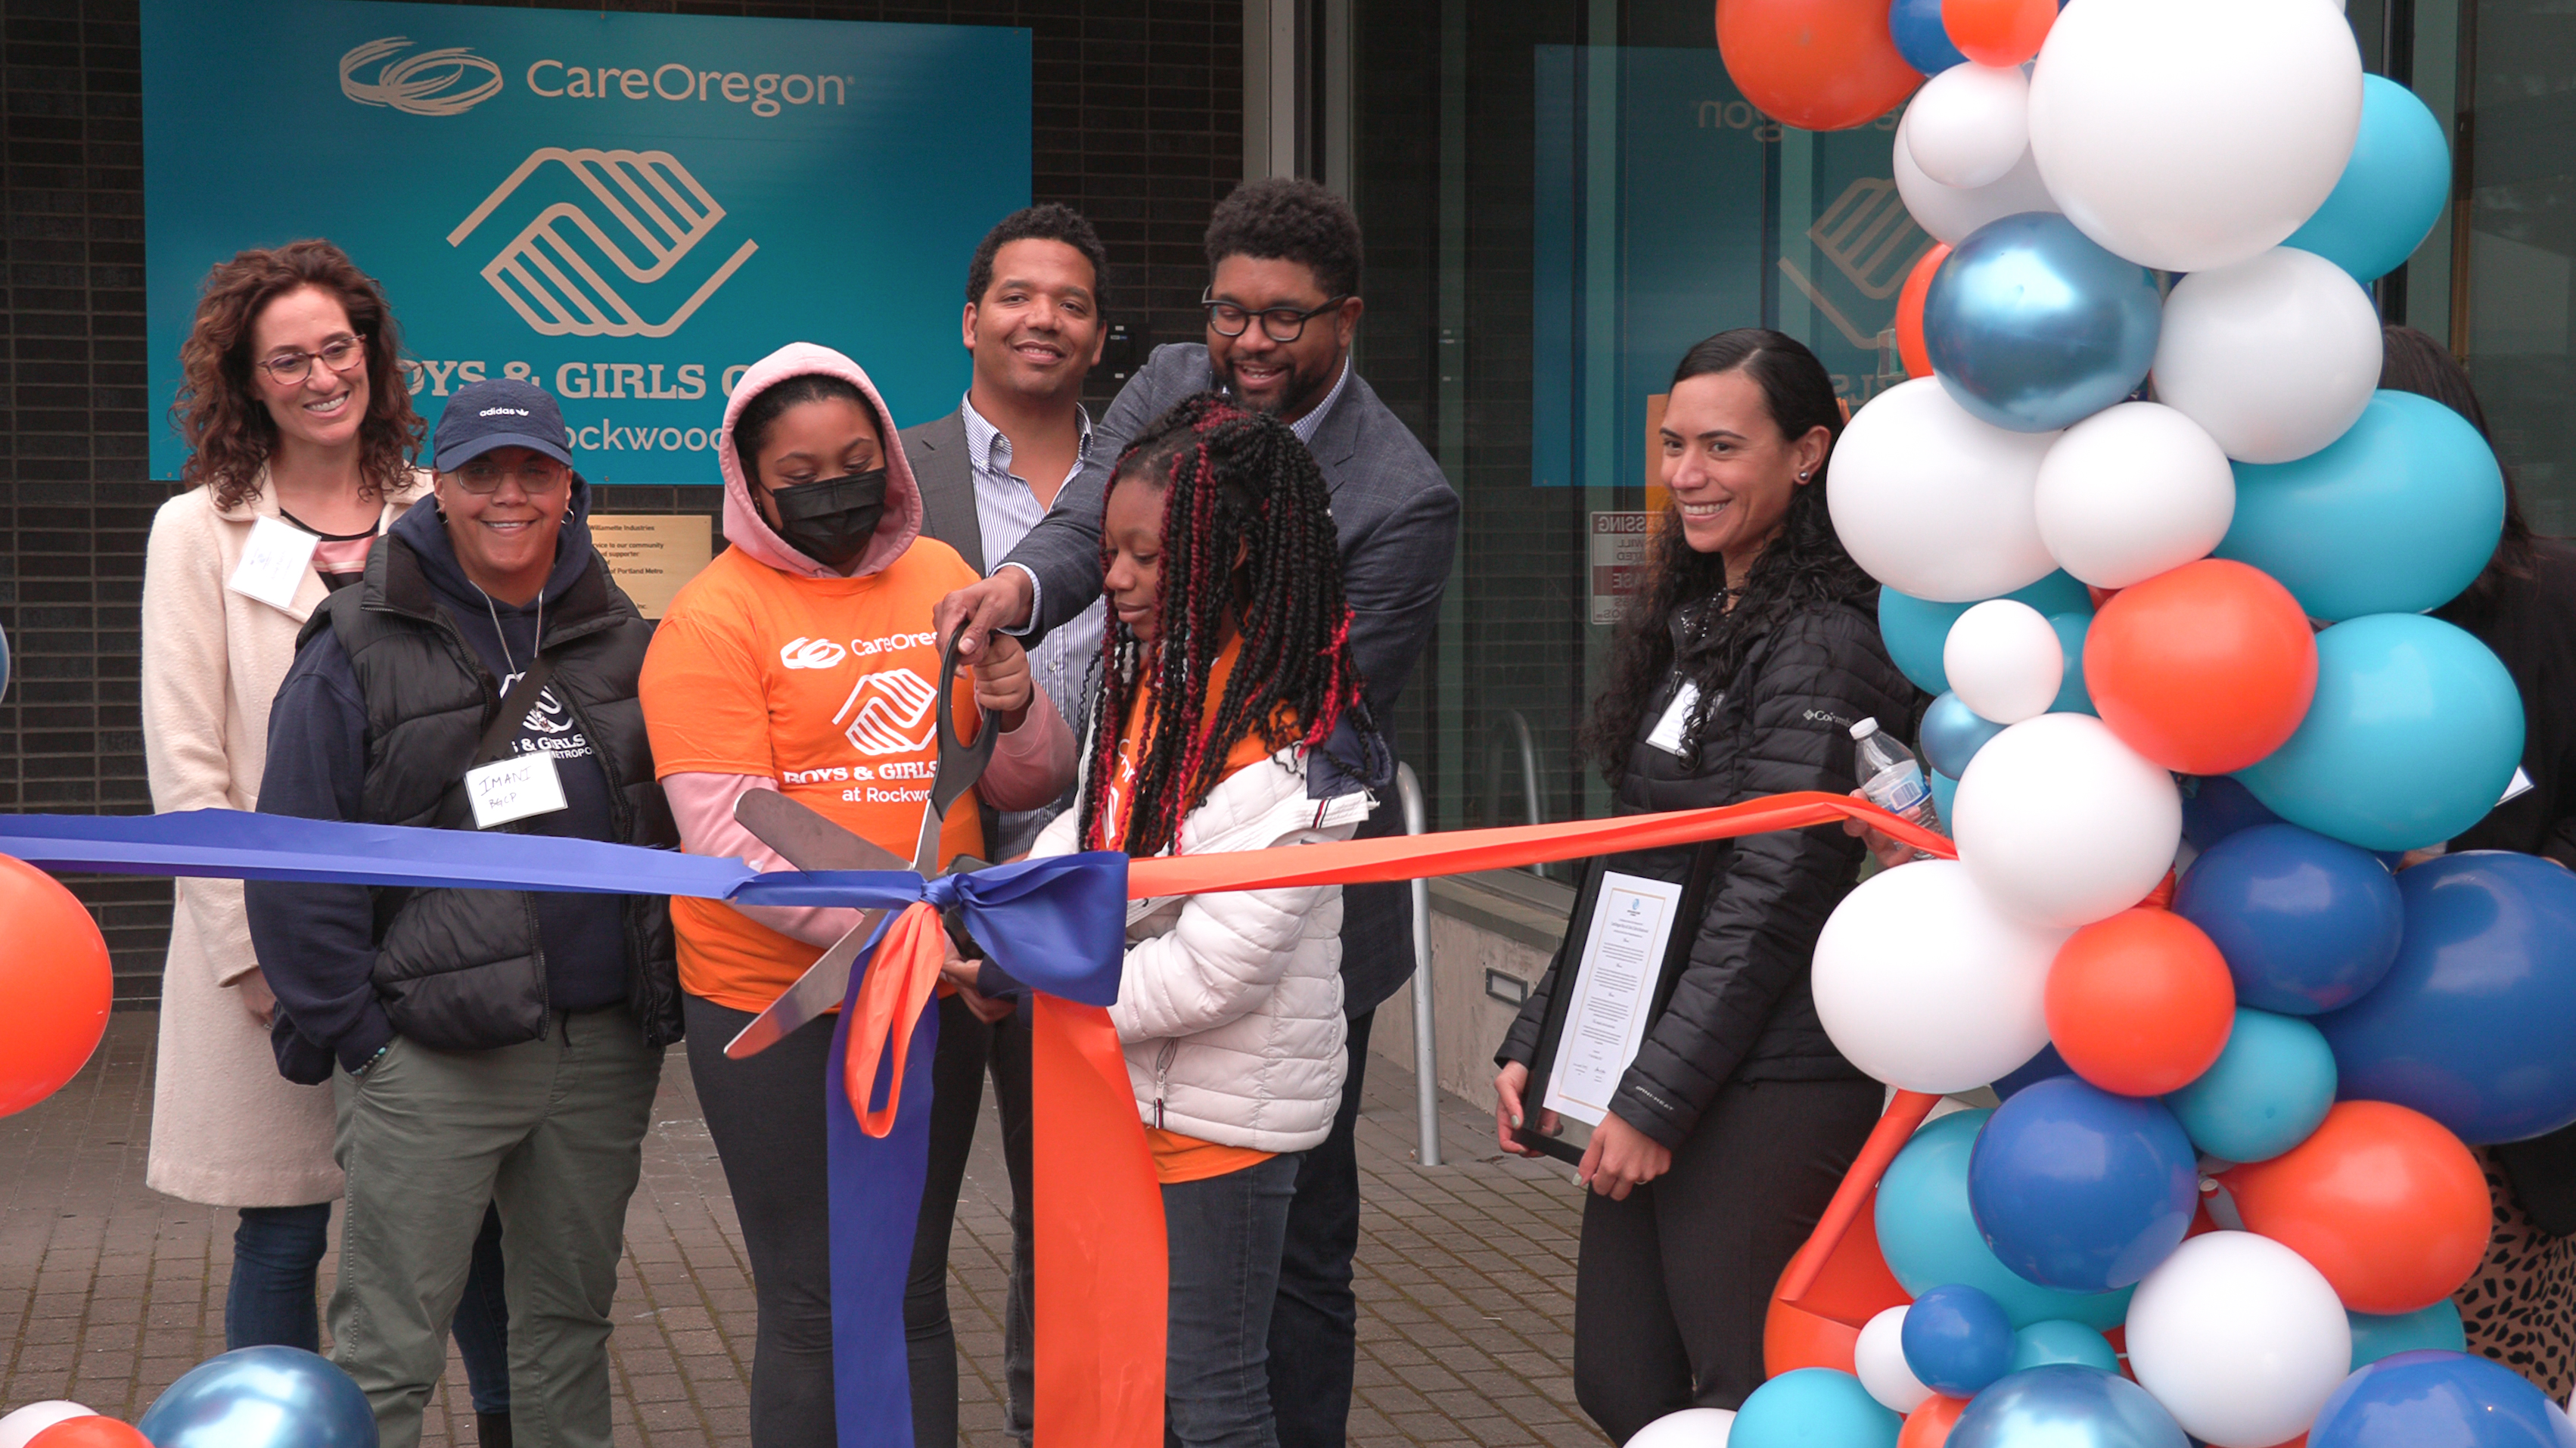 A group of people cut a ribbon at the CareOregon Boys & Girls Club at Rockwood ceremony